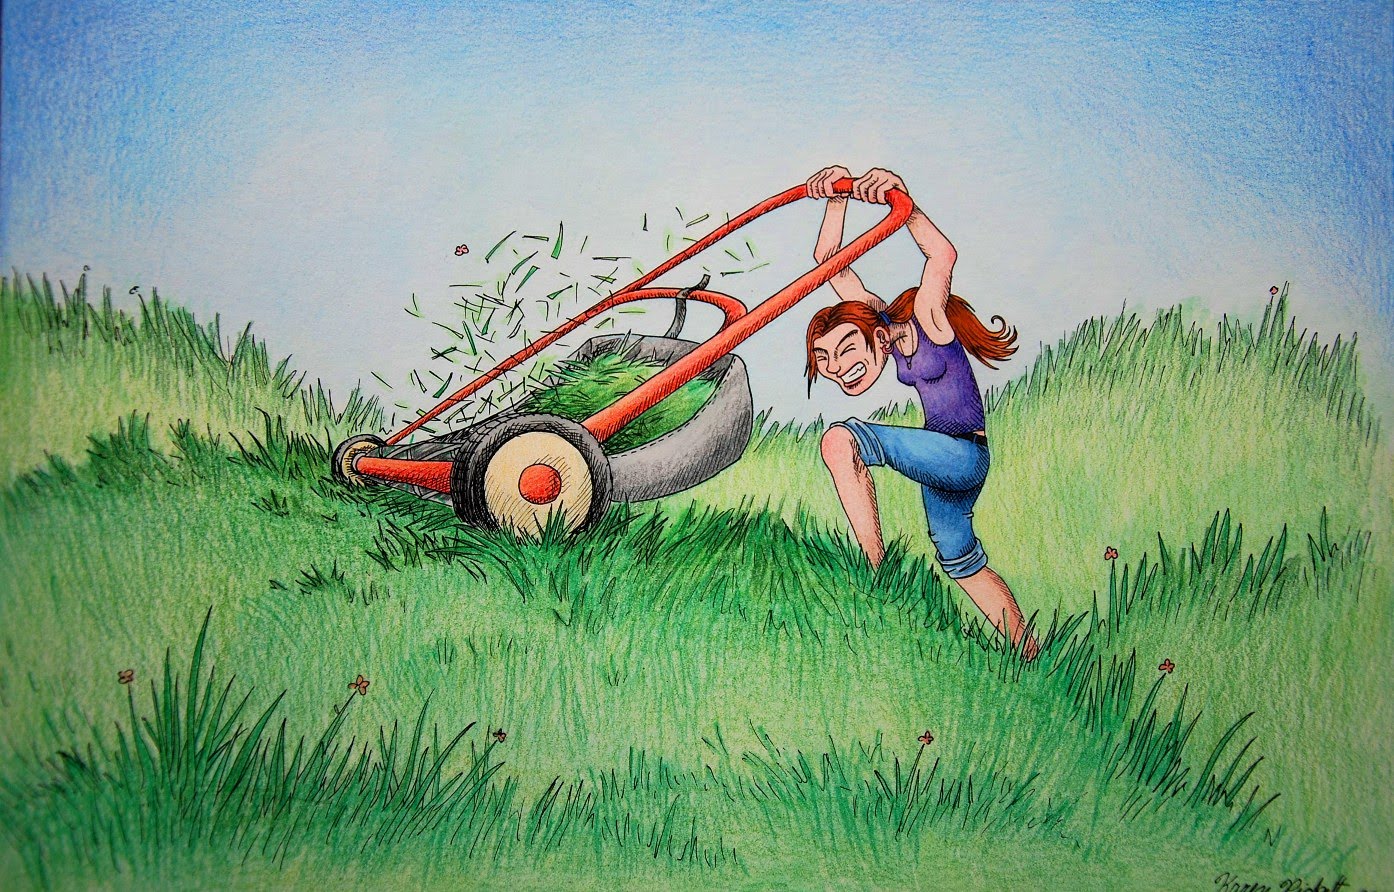 Mowing the lawn.